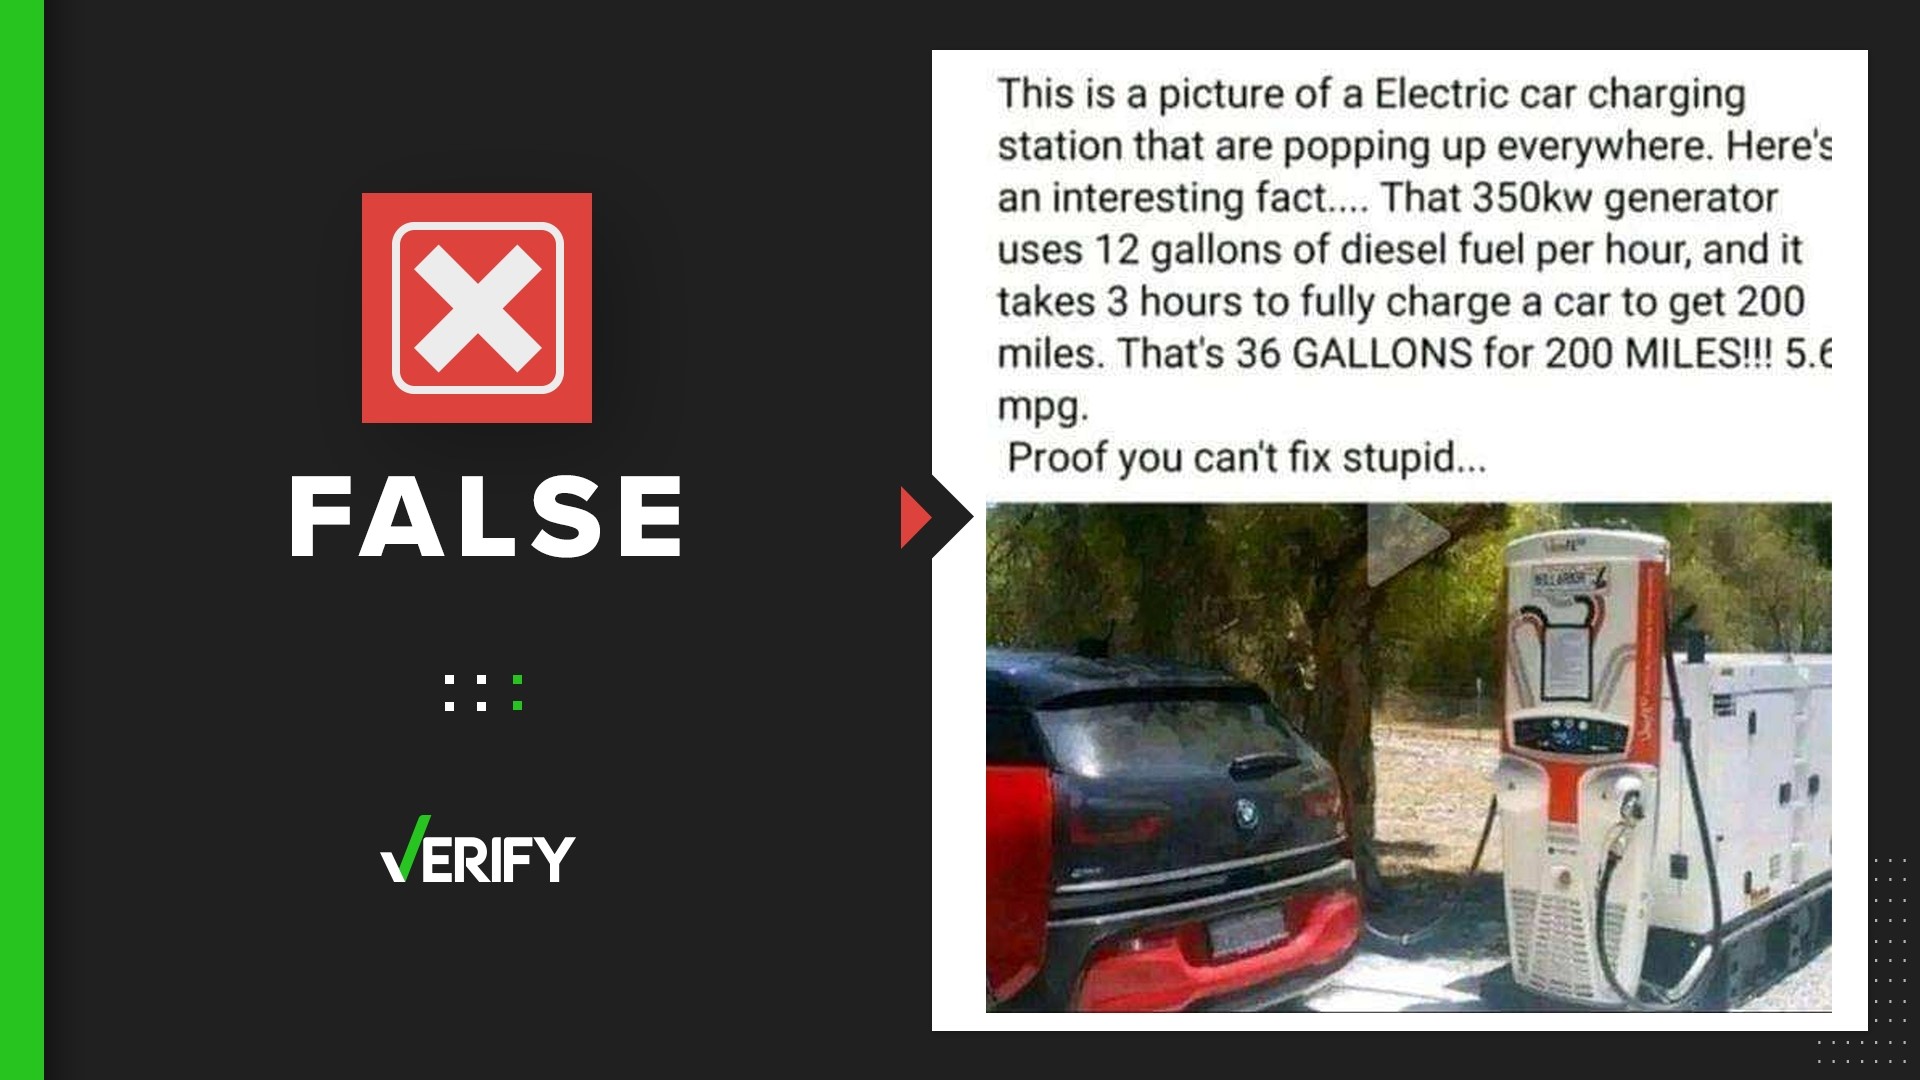 A post falsely claims electric cars like Tesla need three hours on a generator to go 200 miles. But EVs don’t use generators and take only minutes to charge.